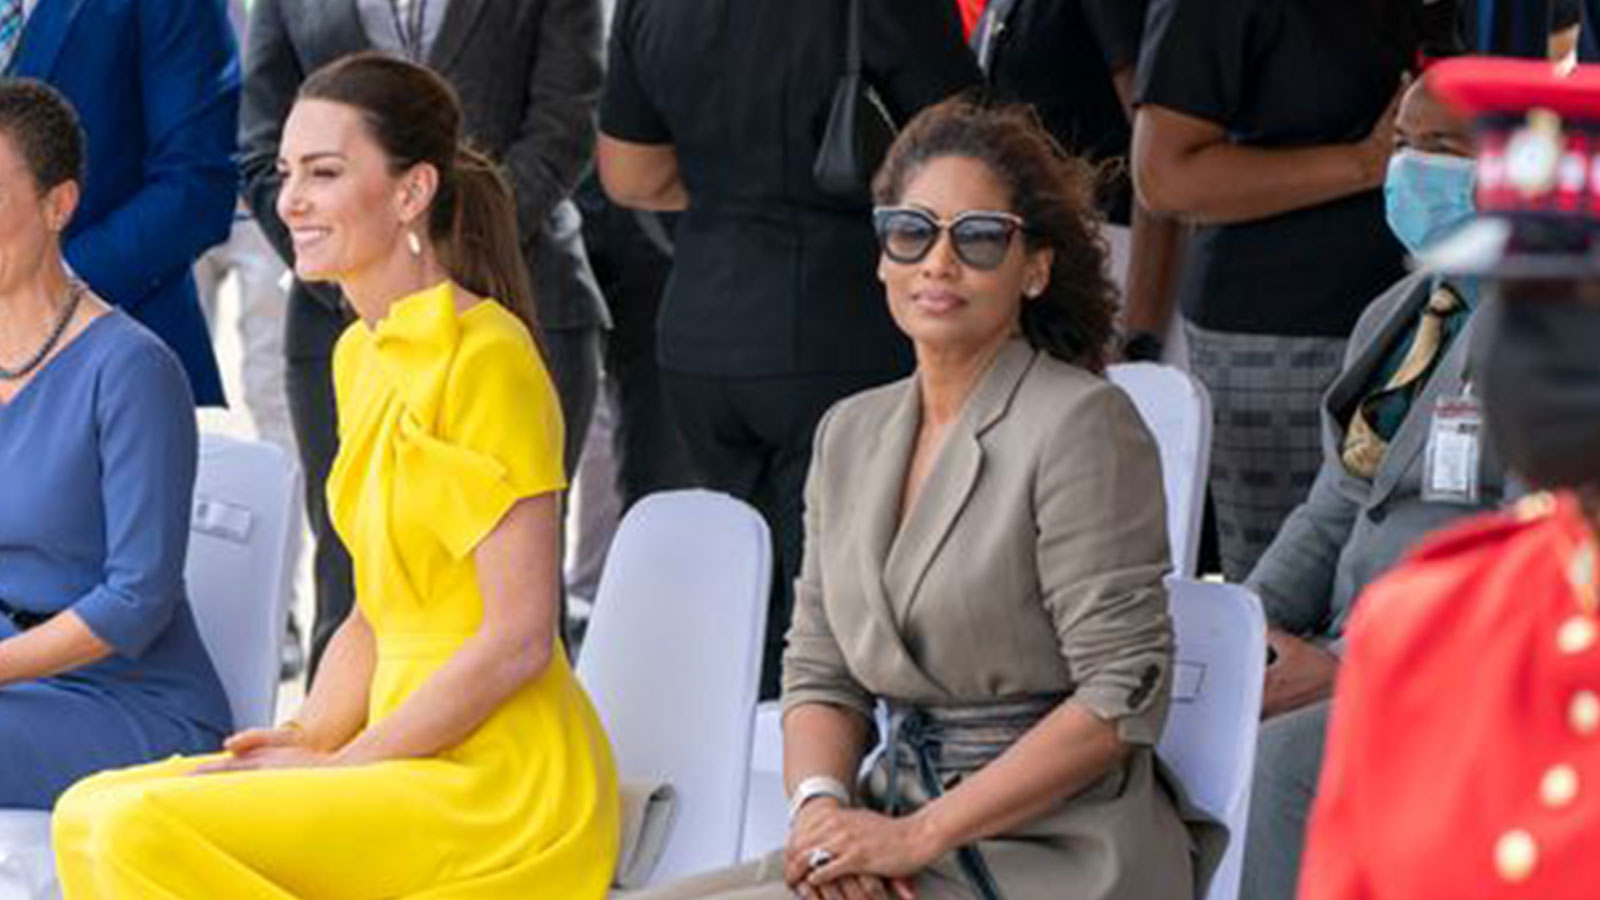 I did not ‘snub’ Kate Middleton. But Jamaica needs more than royal regrets over slavery